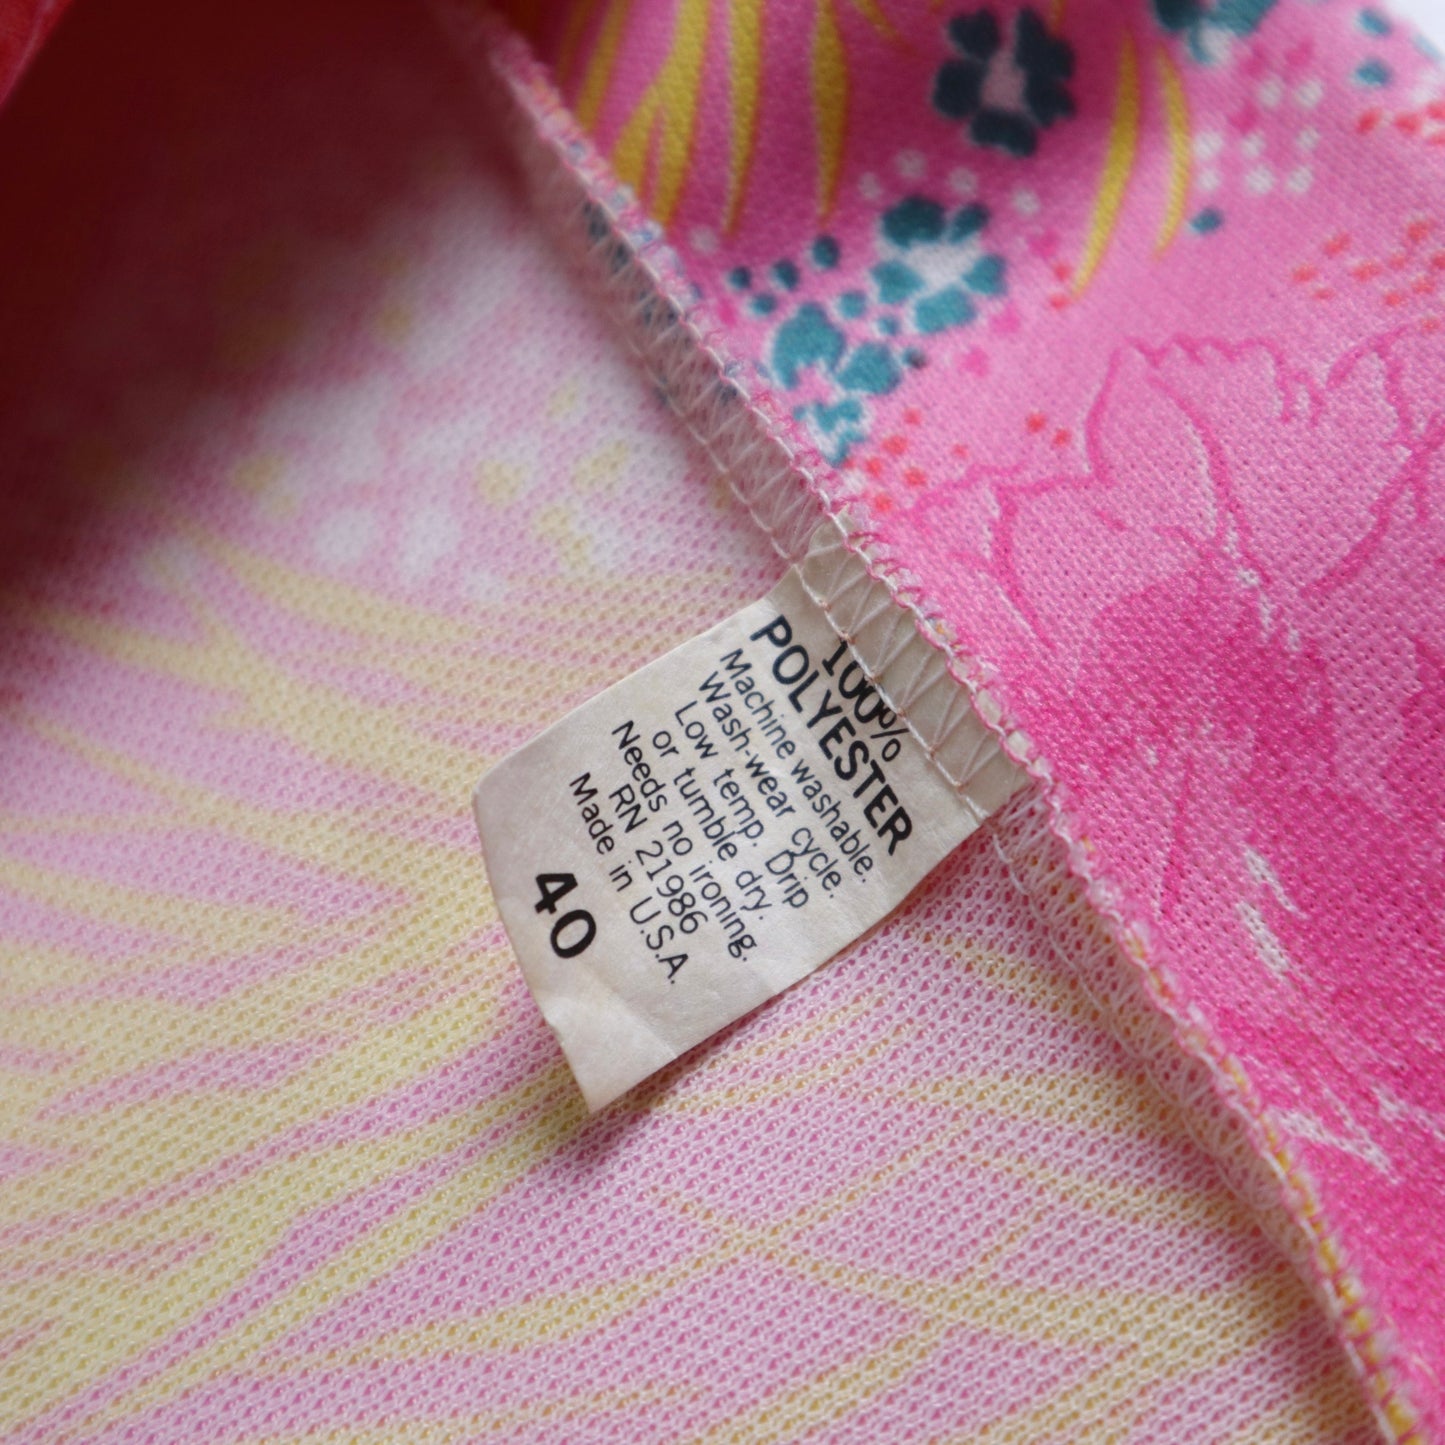 1980s American made pink printed arrow collar shirt in polyester fabric